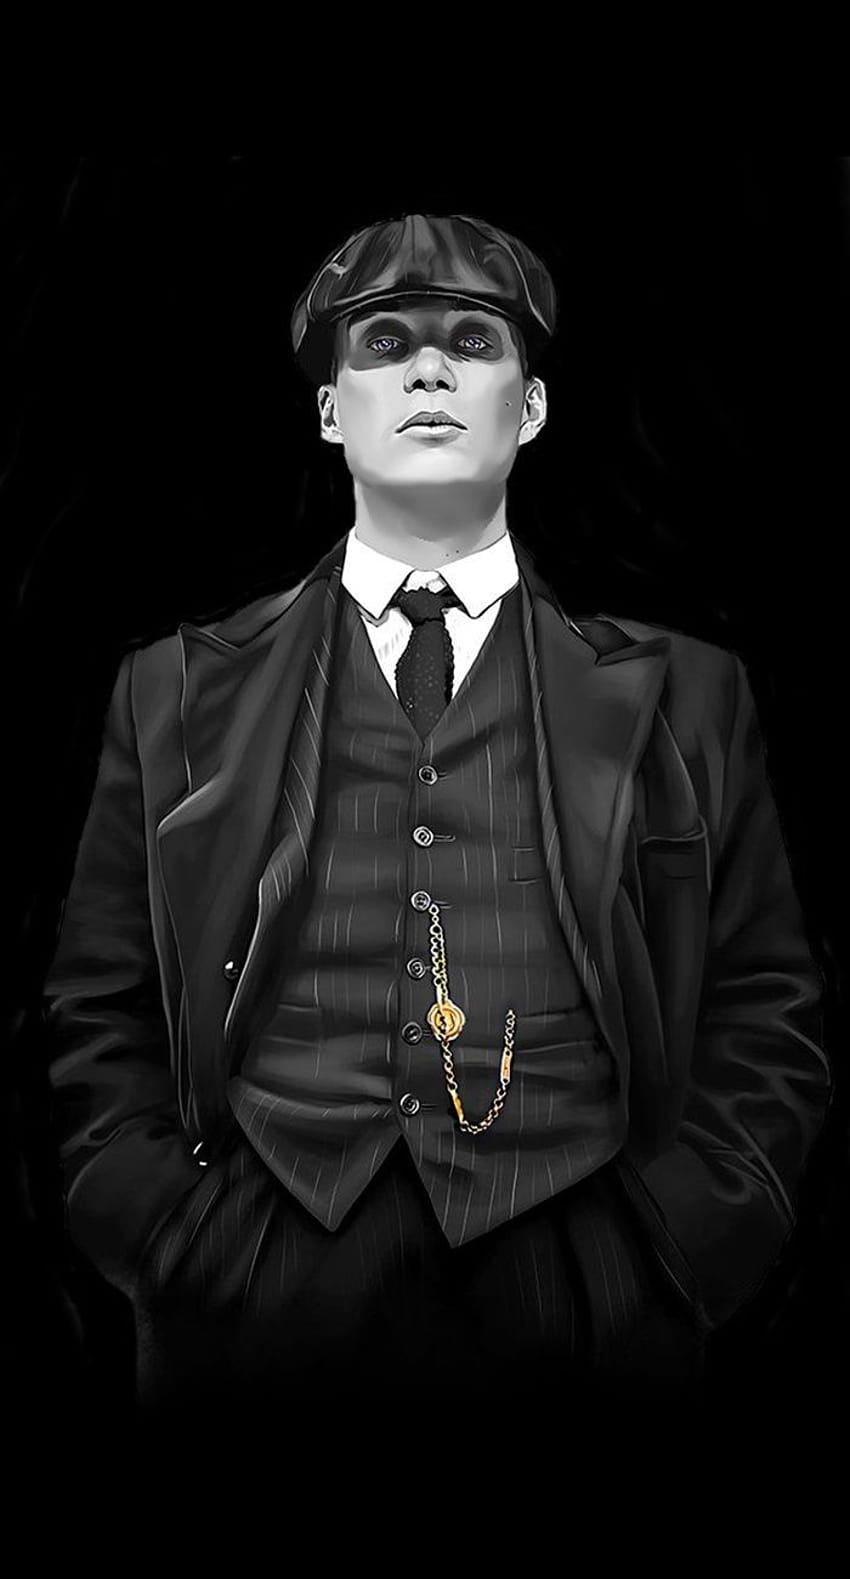 if you're soft on rebellion, it'll grow., peaky blinders amoled HD phone wallpaper